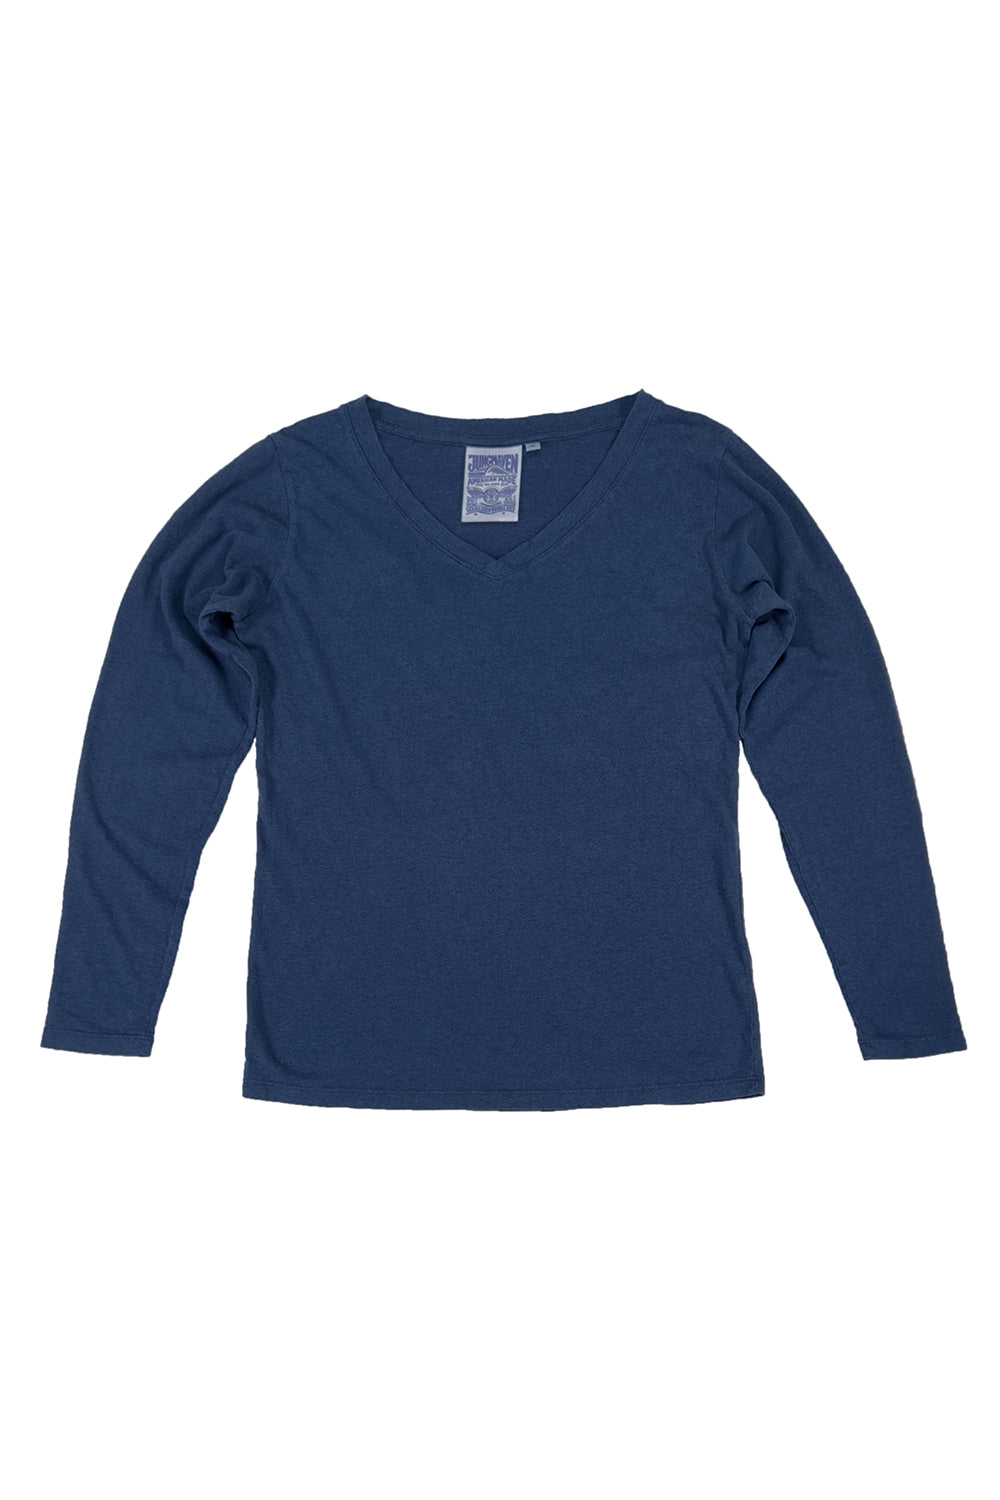 Finch Long Sleeve V-neck | Jungmaven Hemp Clothing & Accessories / Color: Navy